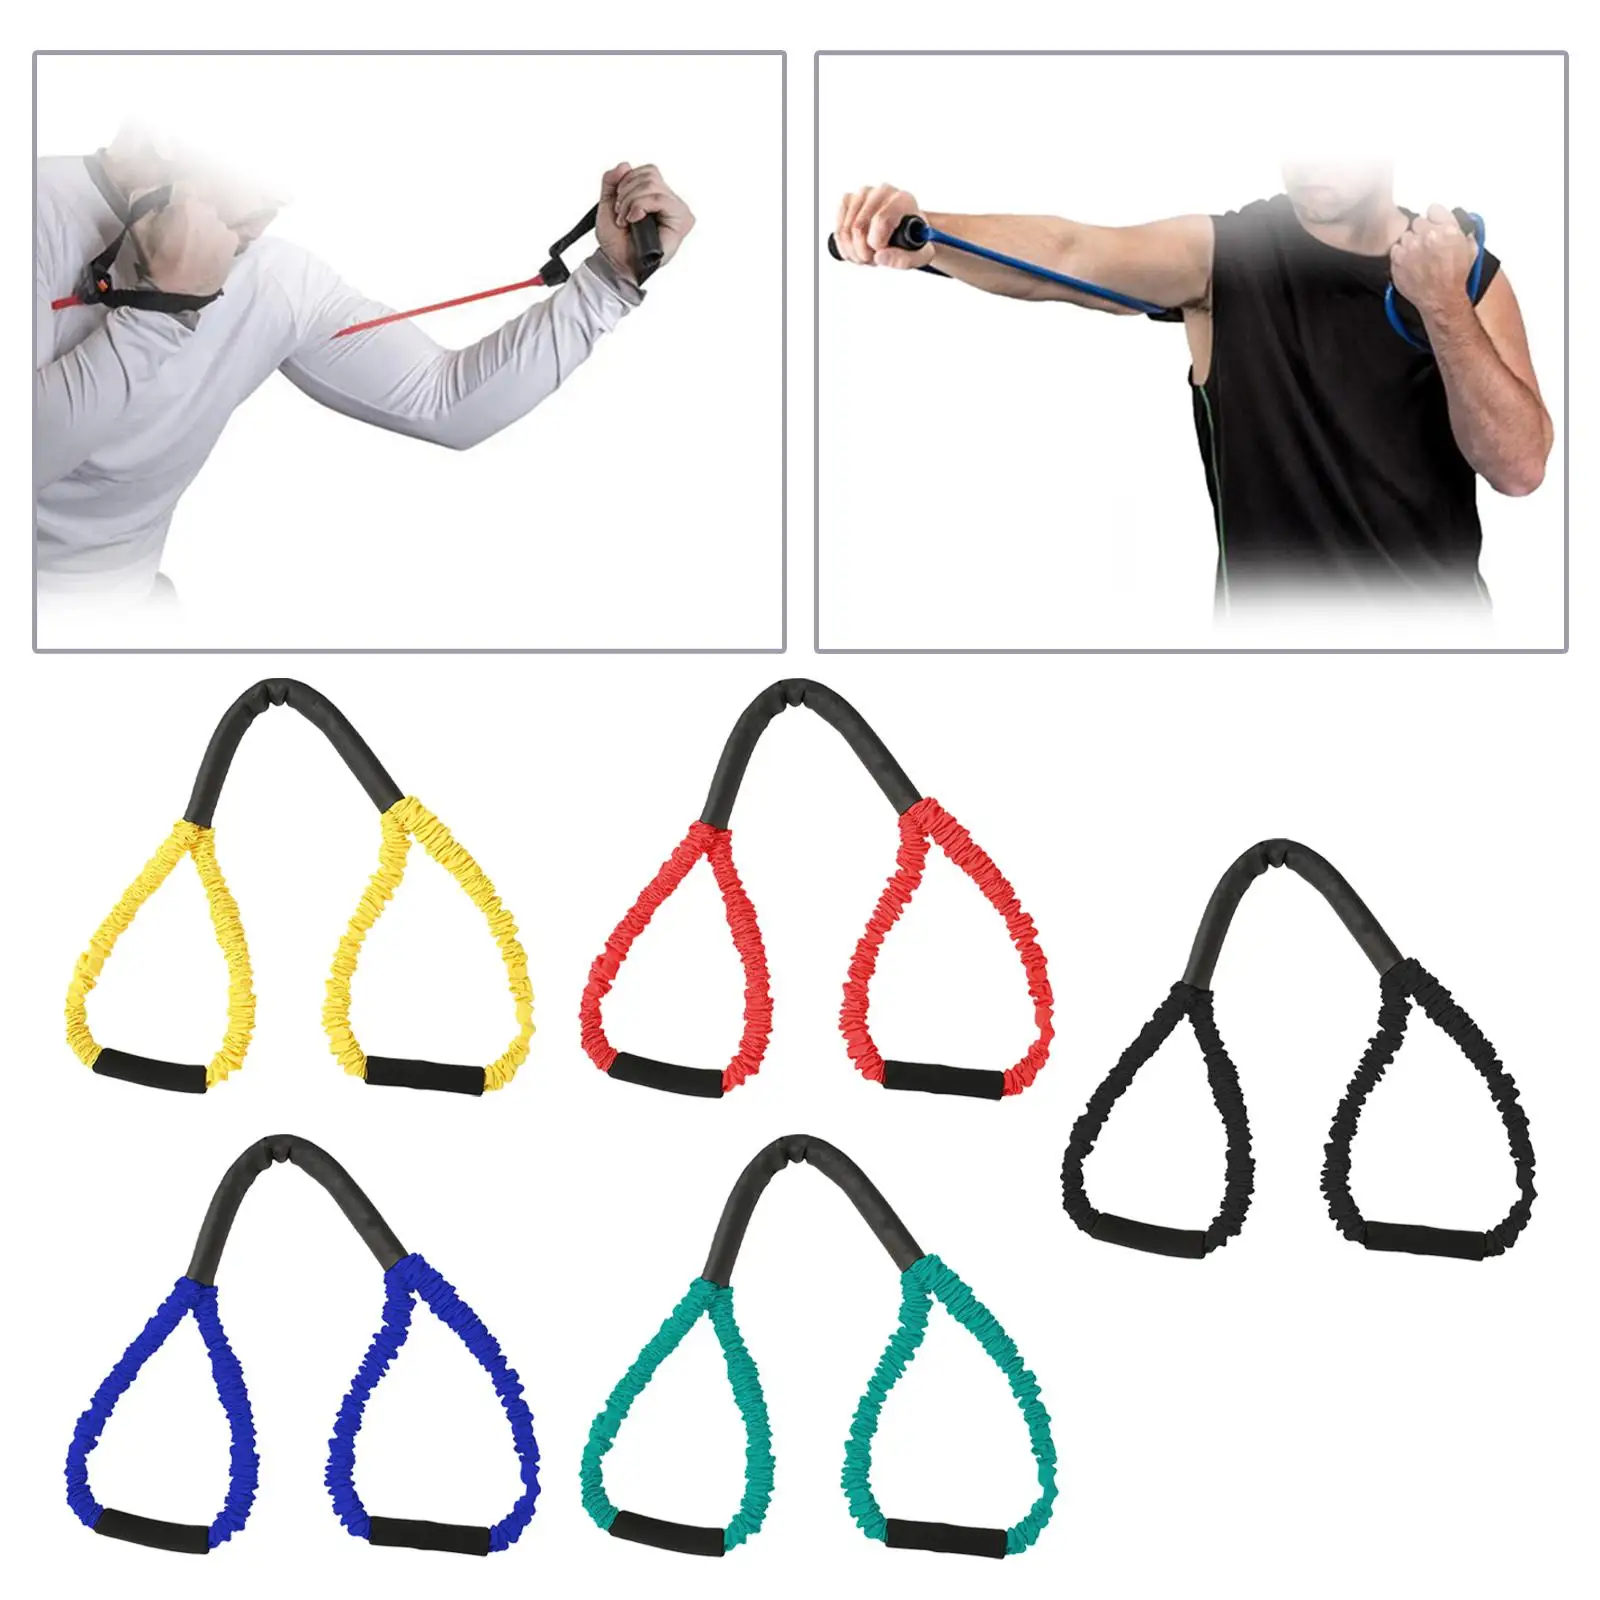 Boxing Resistance Bands Exercise Bands Elastic Bands Home Gym with Handles